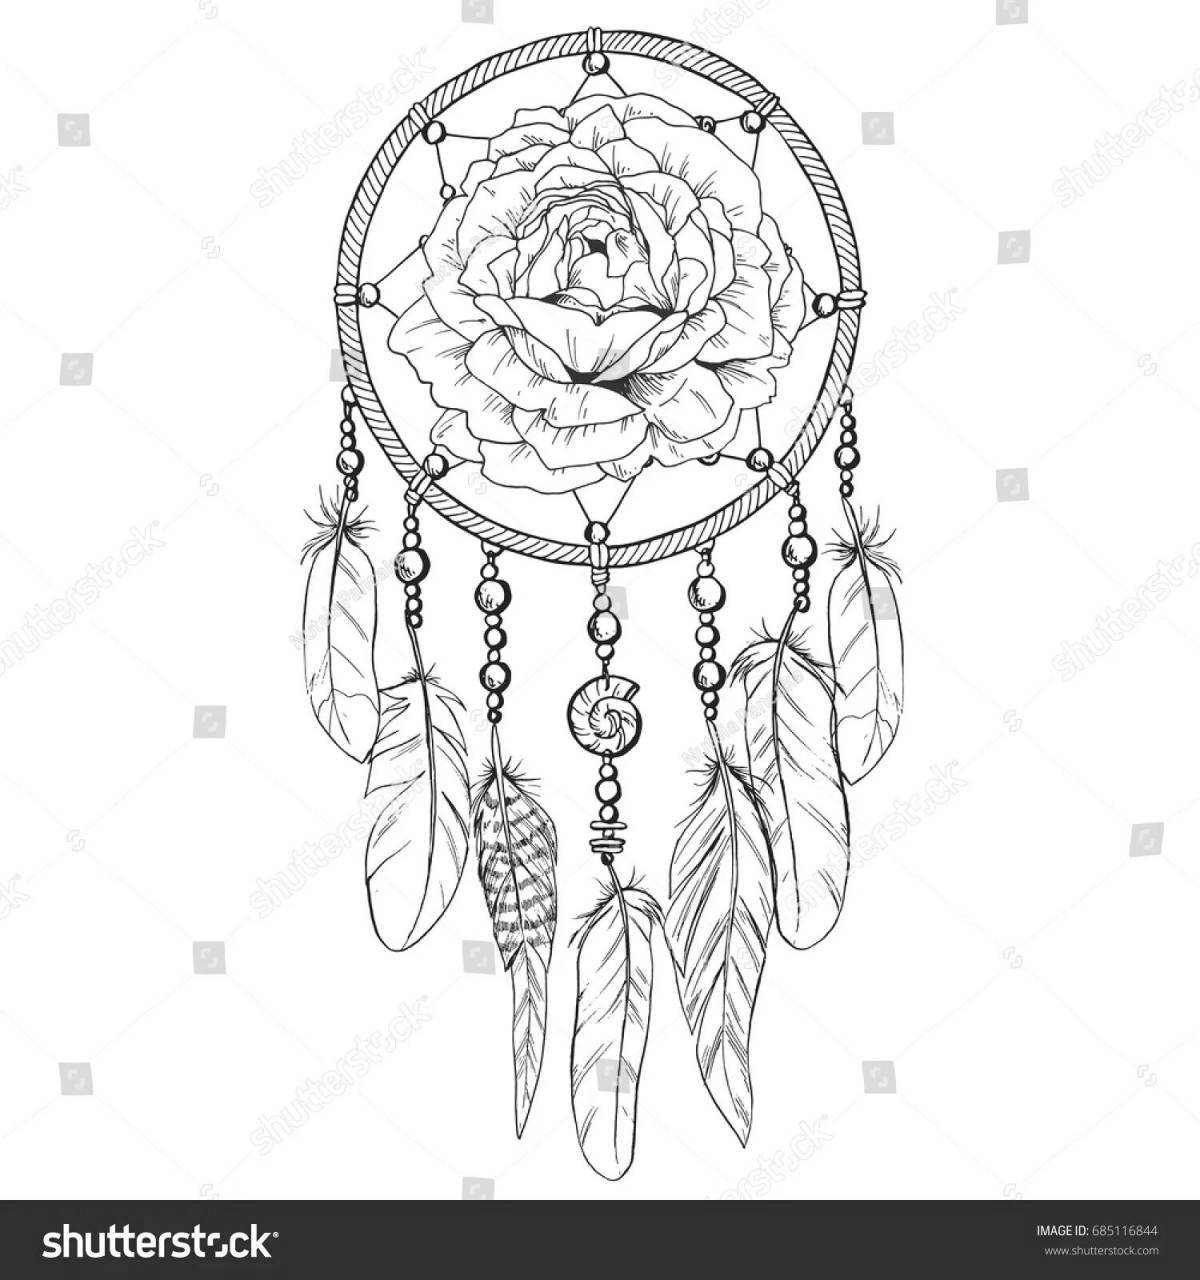 Charming coloring book antistress dream catcher